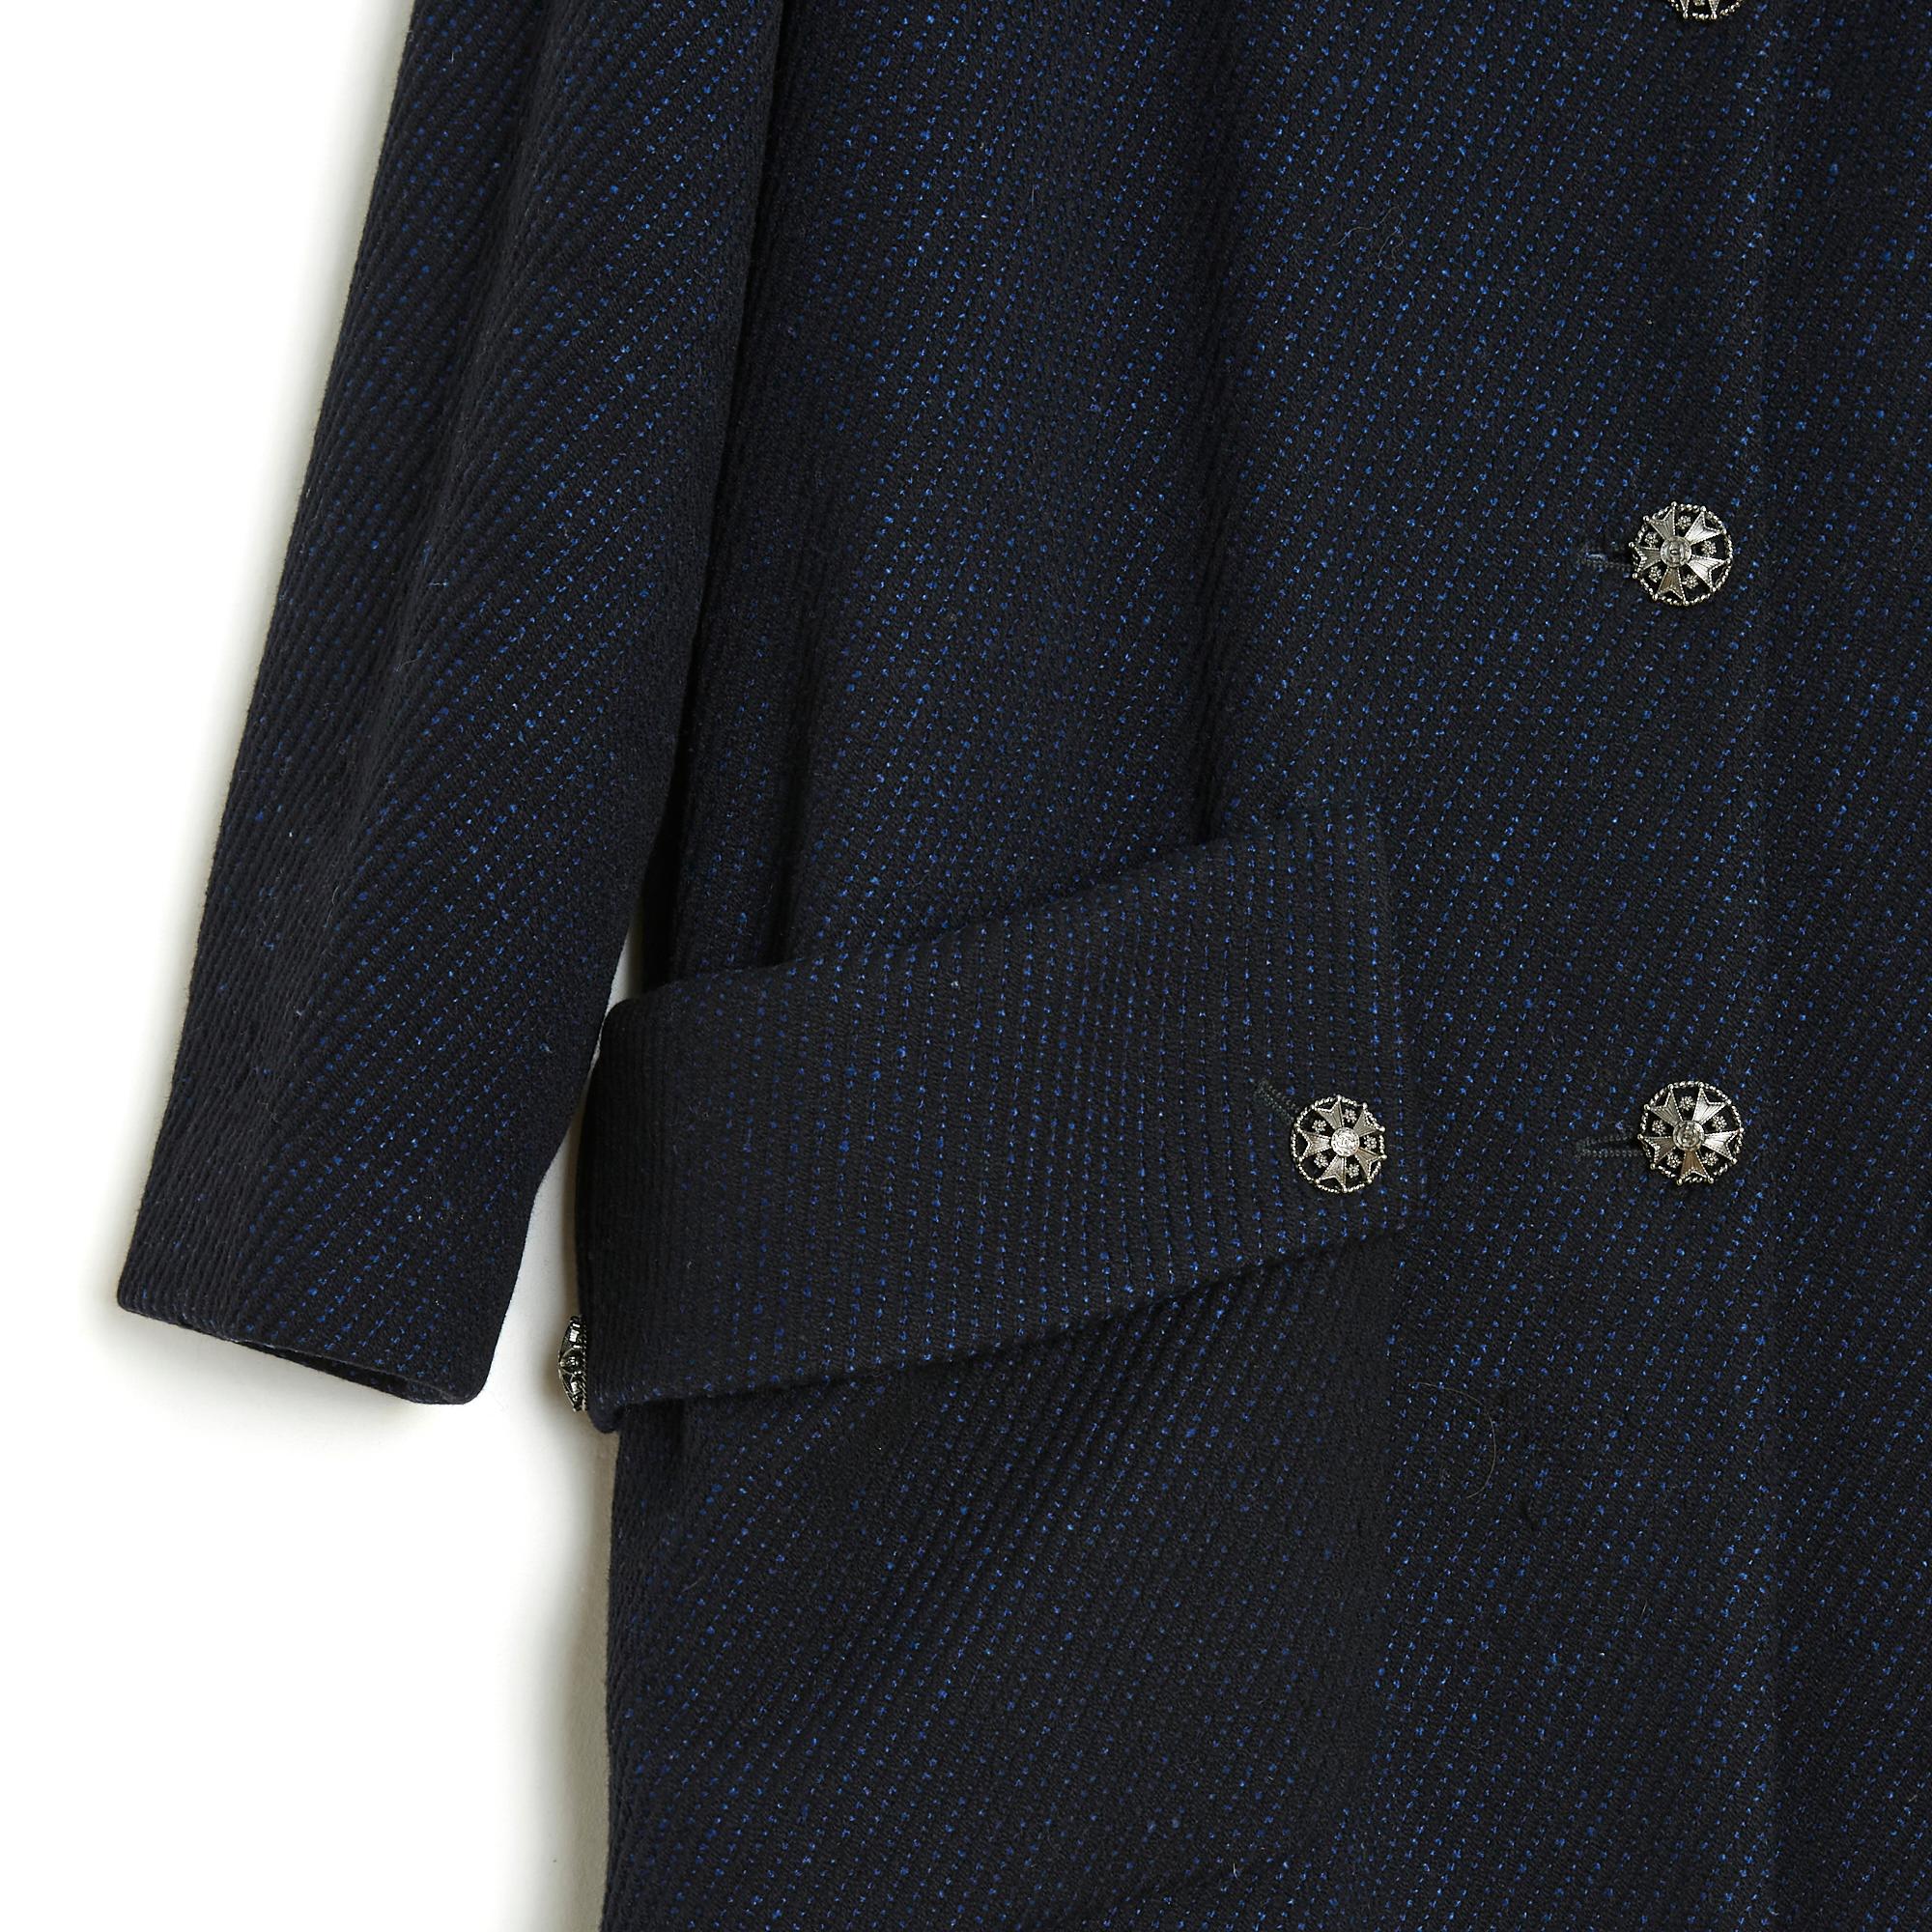 Chanel coat Pre Fall or Métiers d'Art 2009 collection (Paris Moscow) mid-length in thick soft wool cloth with black and blue (woven) pattern, straight, slightly oversized and flared shape, pea coat collar closed with a hook and 5 large jeweled